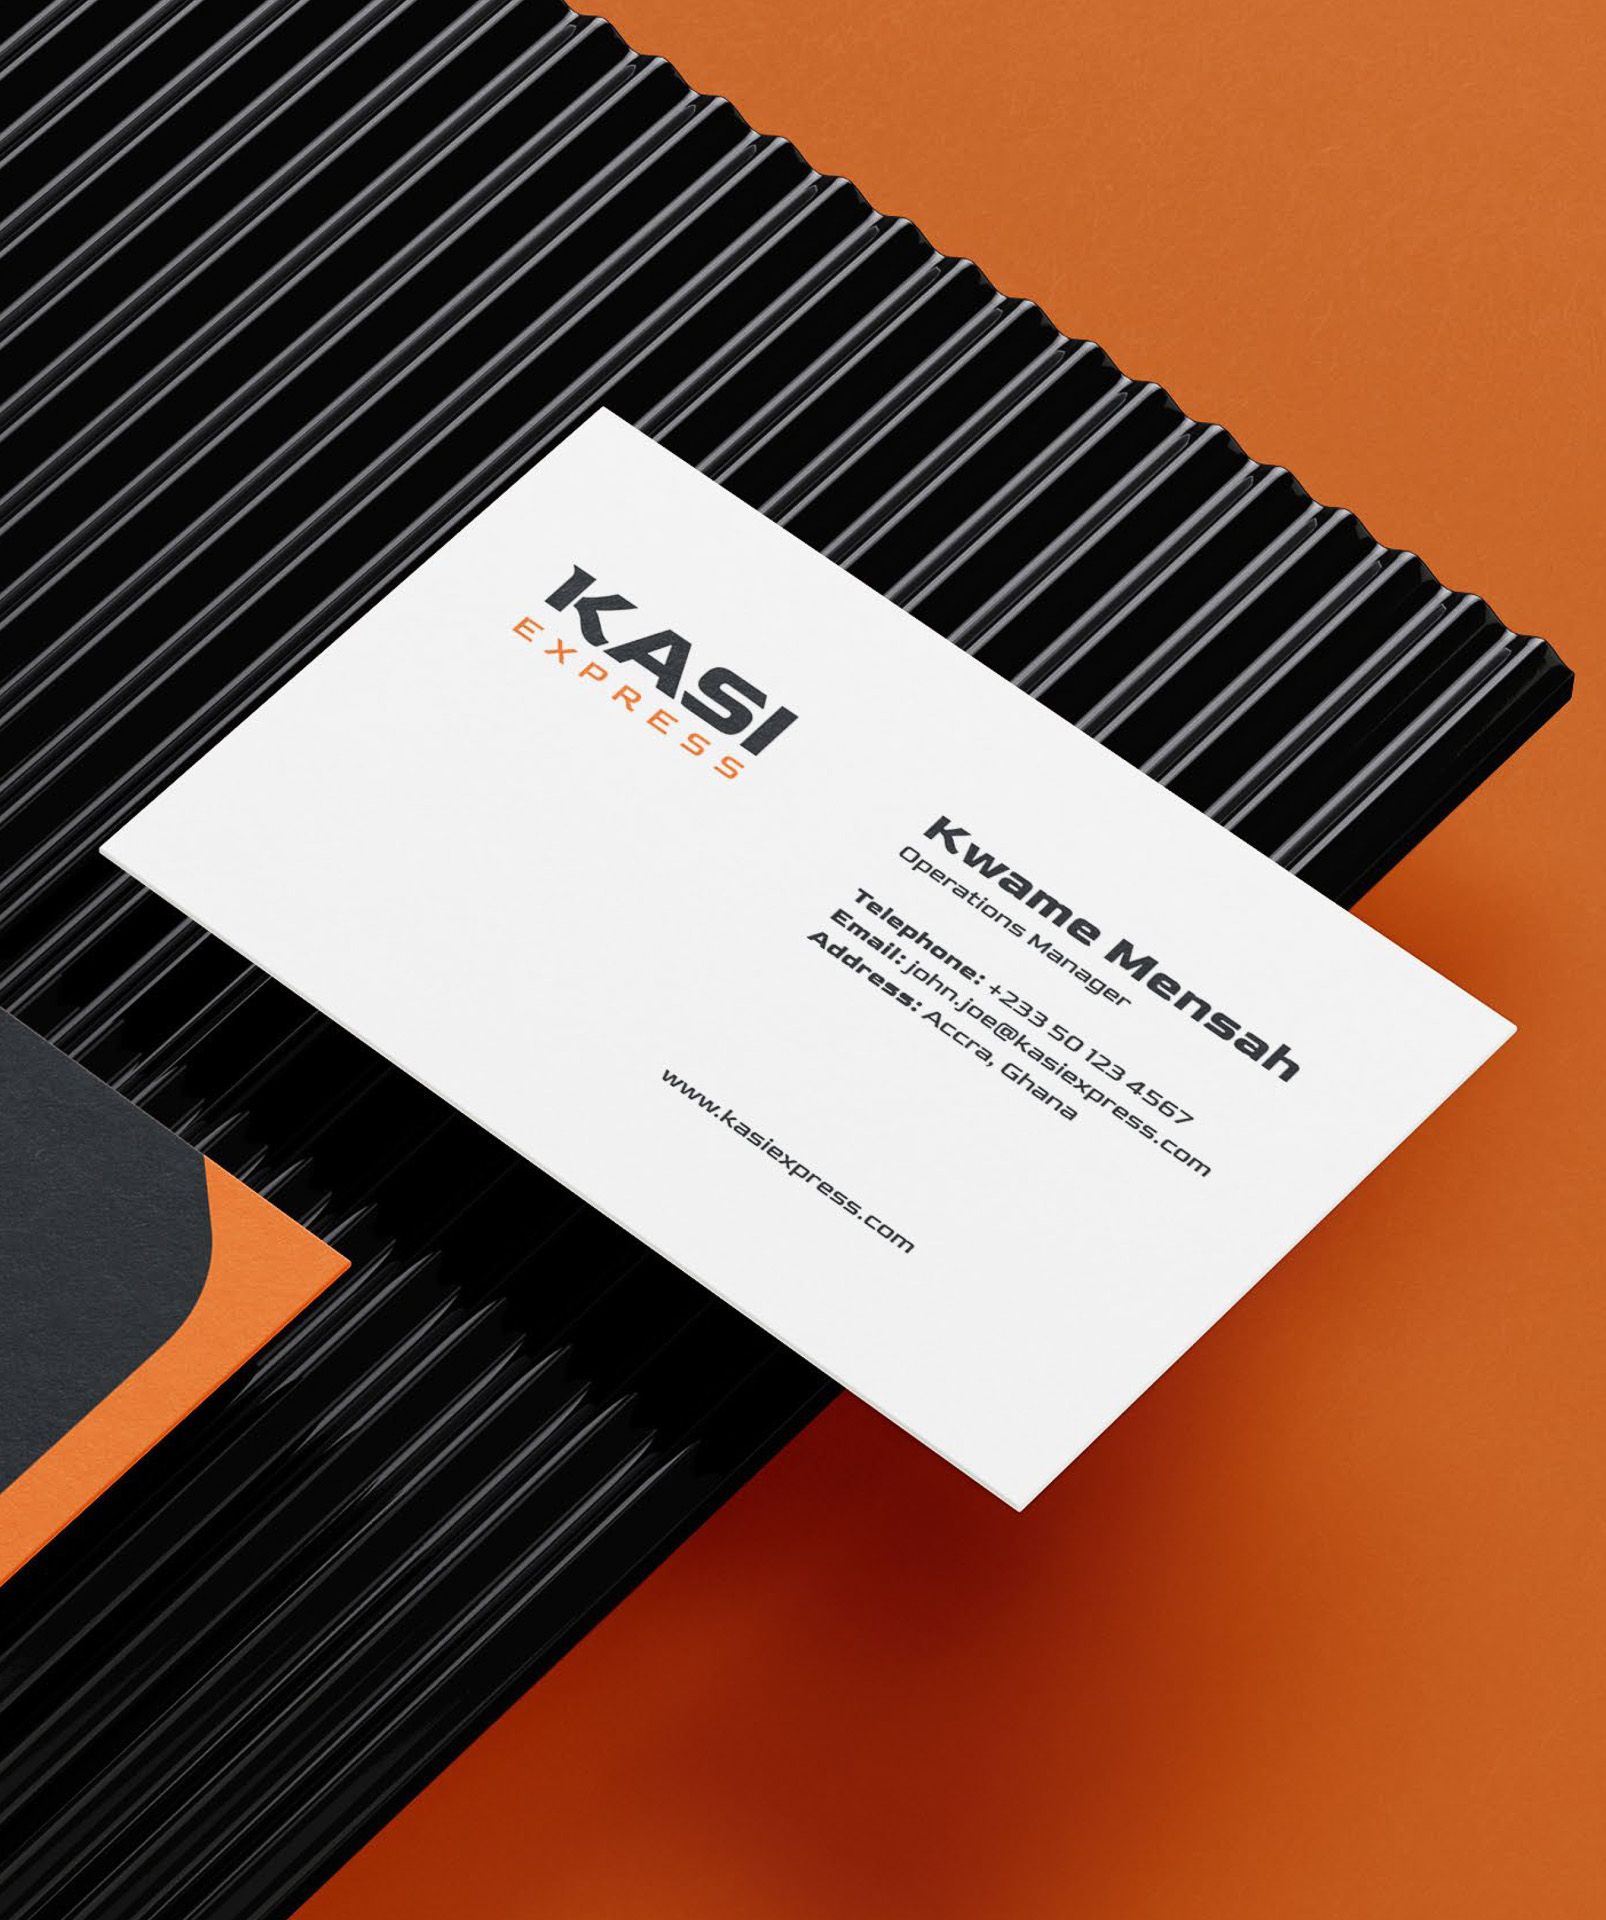 ThirdLaw branding and web design - Kasi Express Cover